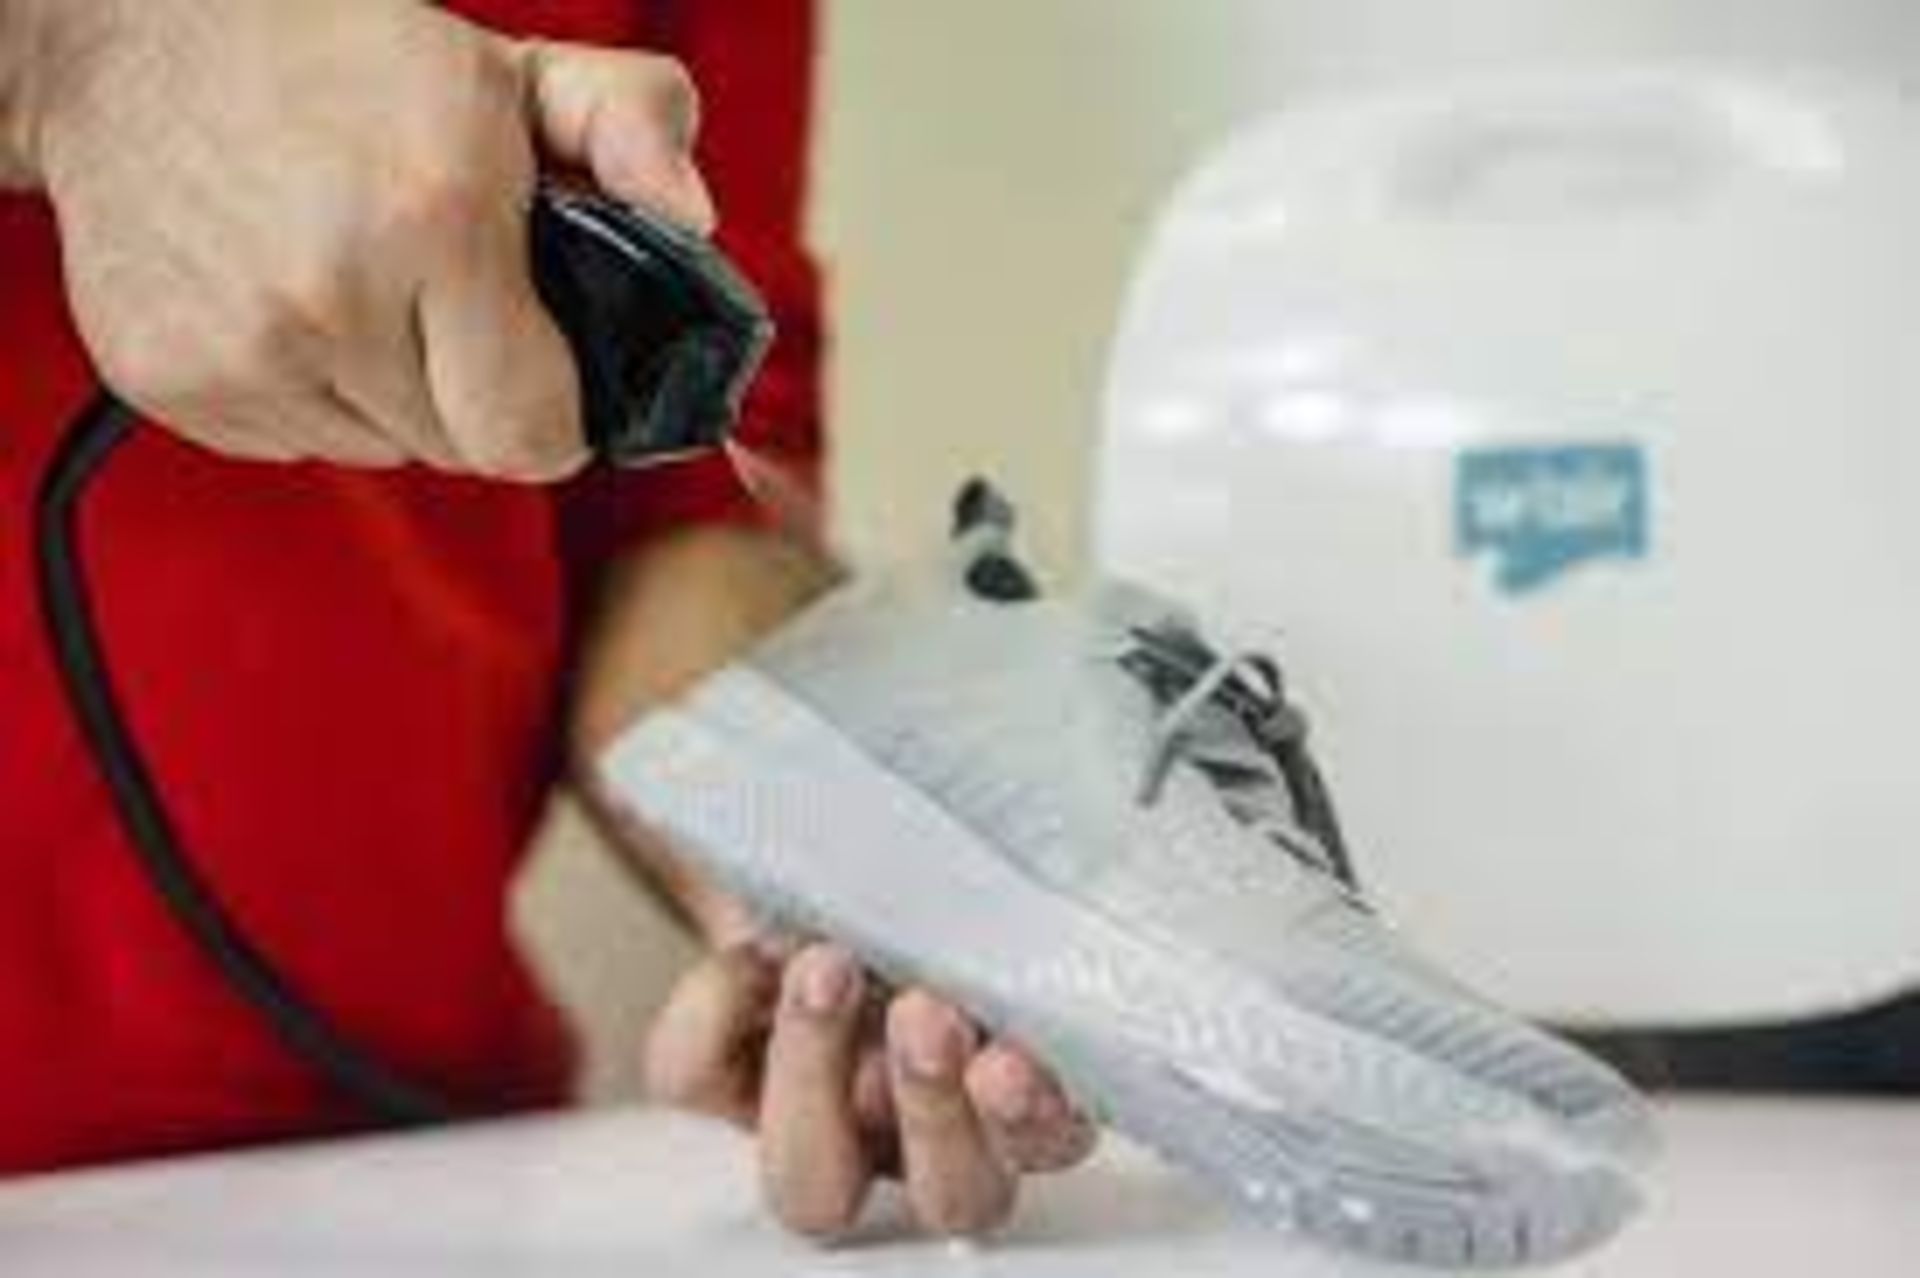 100 X BRAND NEW W'AIR SNEAKER CLEANING SYSTEMS RRP £299, The w'air uses hydrodynamic technology - Image 4 of 6